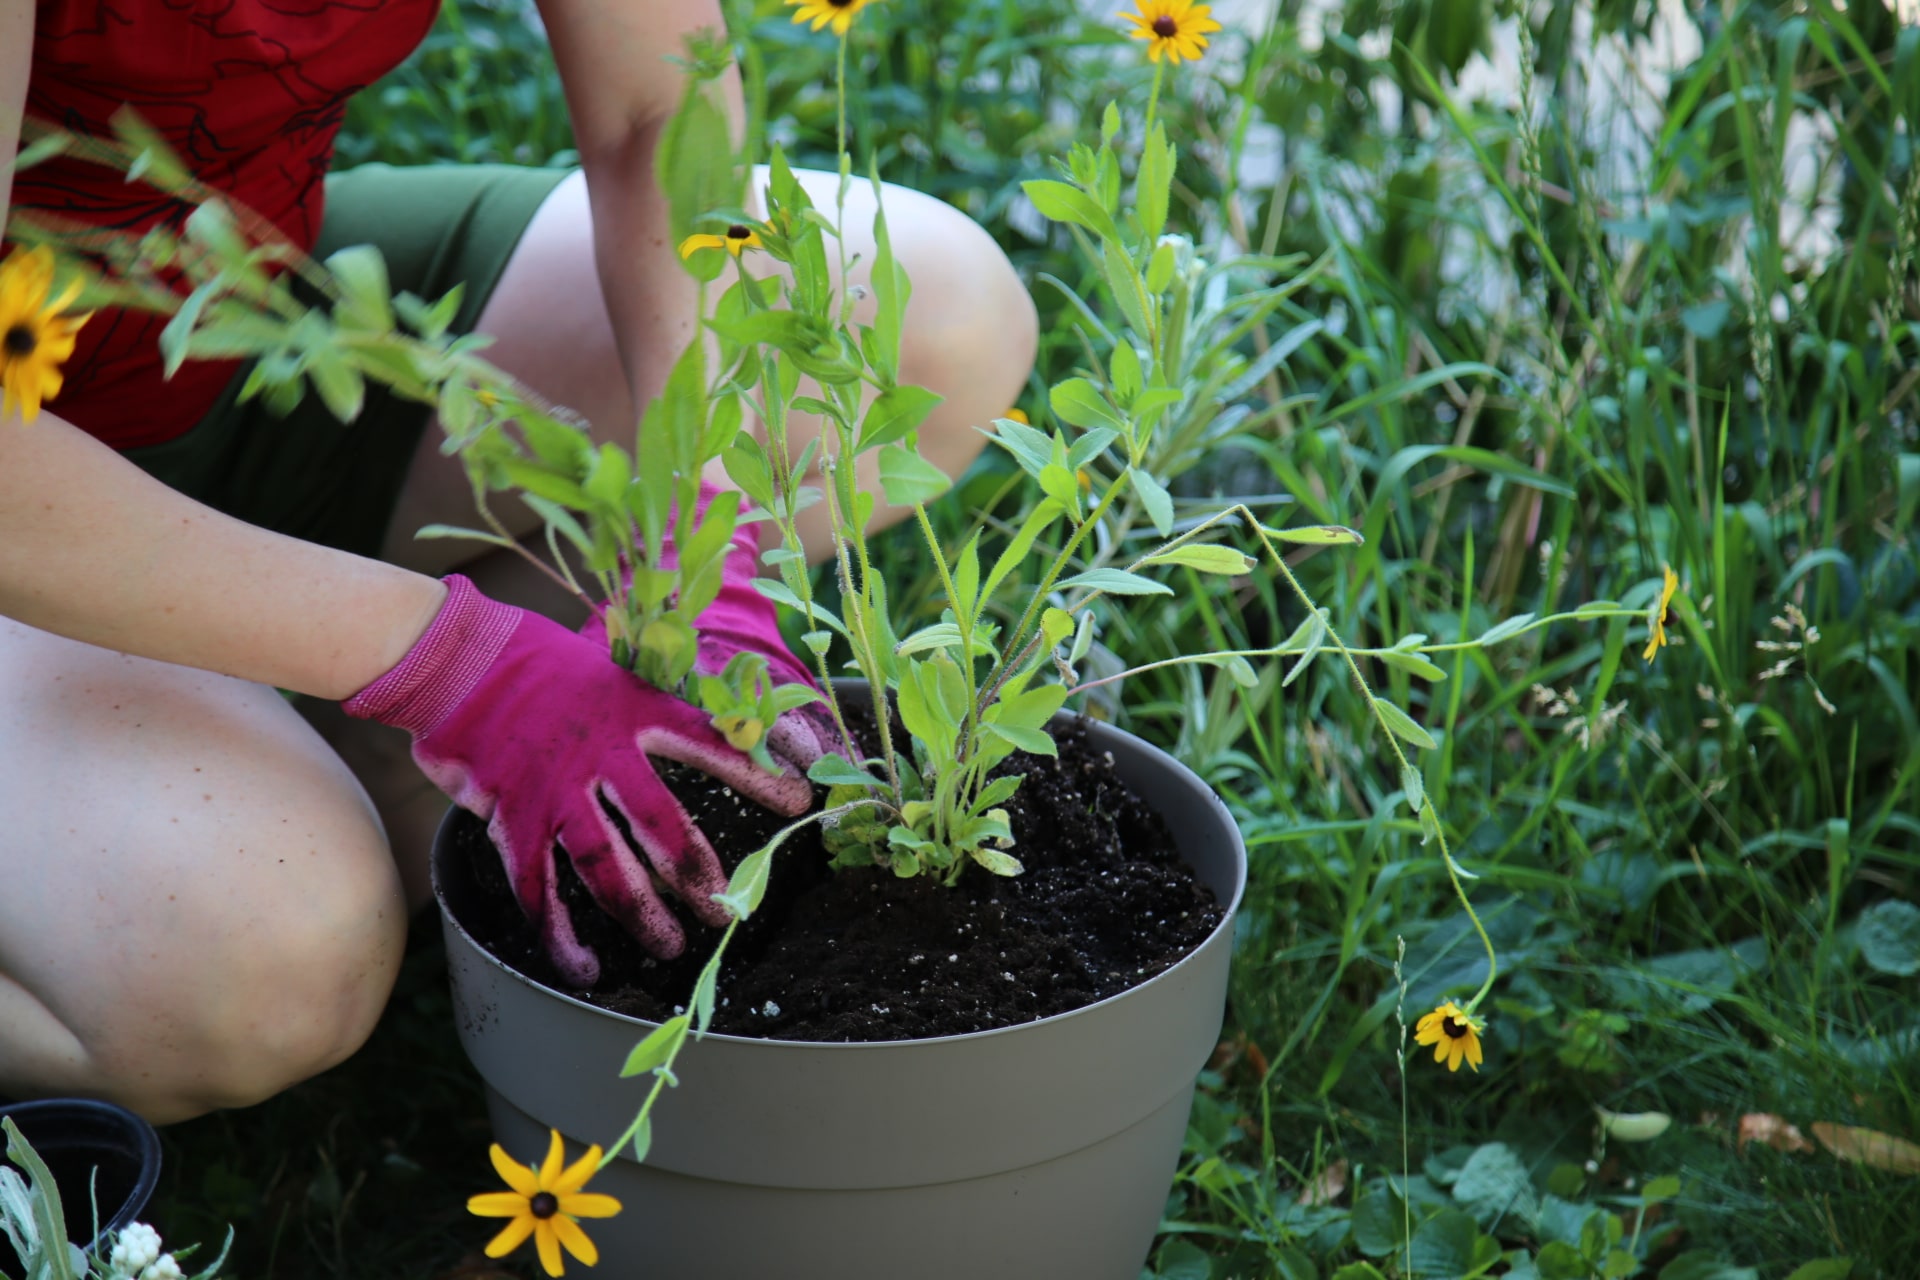 Hands planting a native flower in a pot